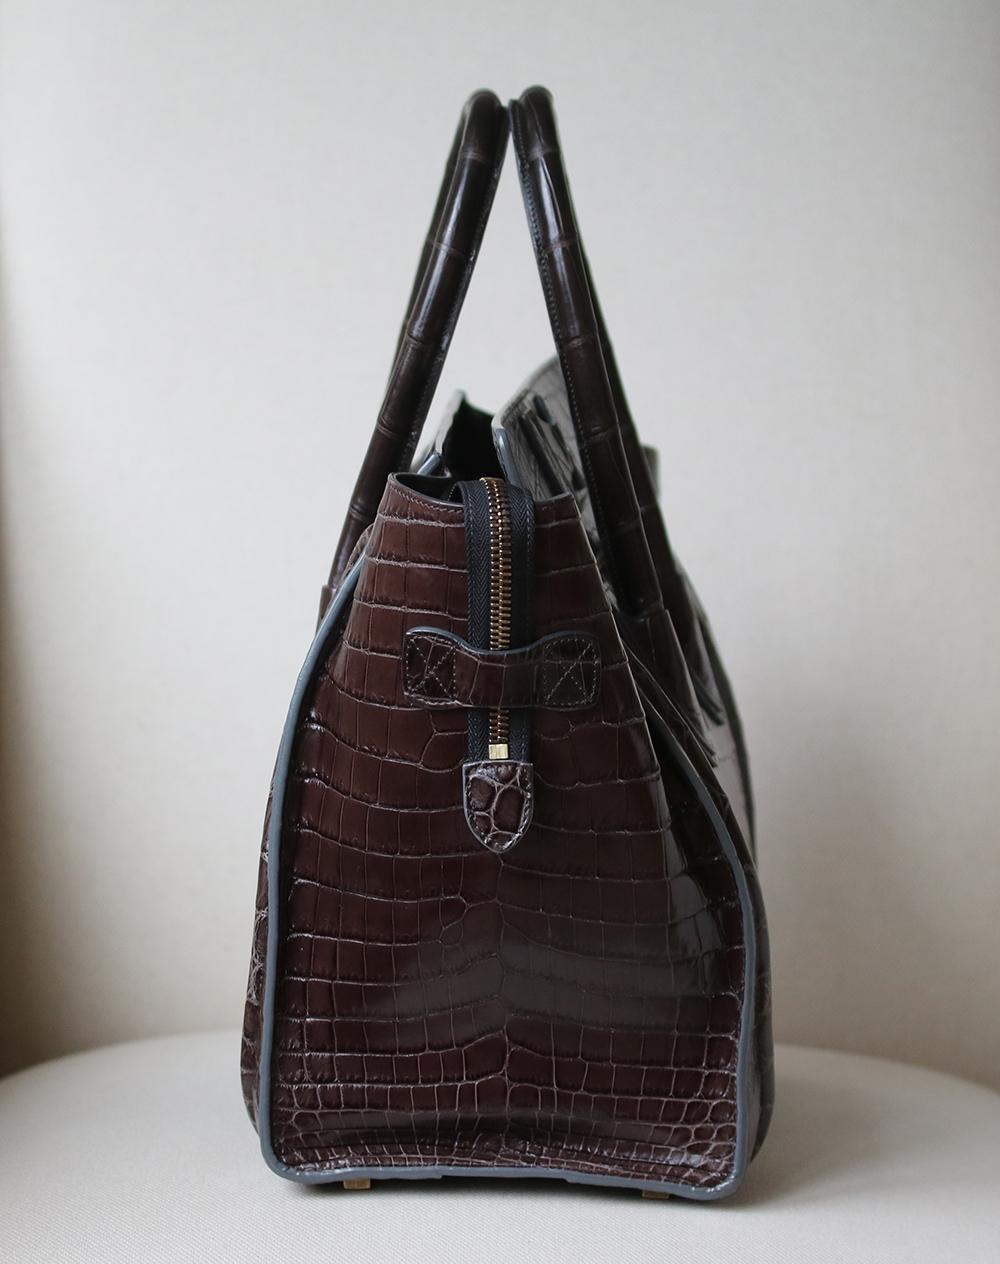 Celine Crocodile Handbag with Goldtone Hardware in beautiful crocodile leather in the most beautiful rich chocolate brown colour with tonal stitching. 
 
Condition: Excellent used condition. Leather is still stiff. A few minor marks inside and